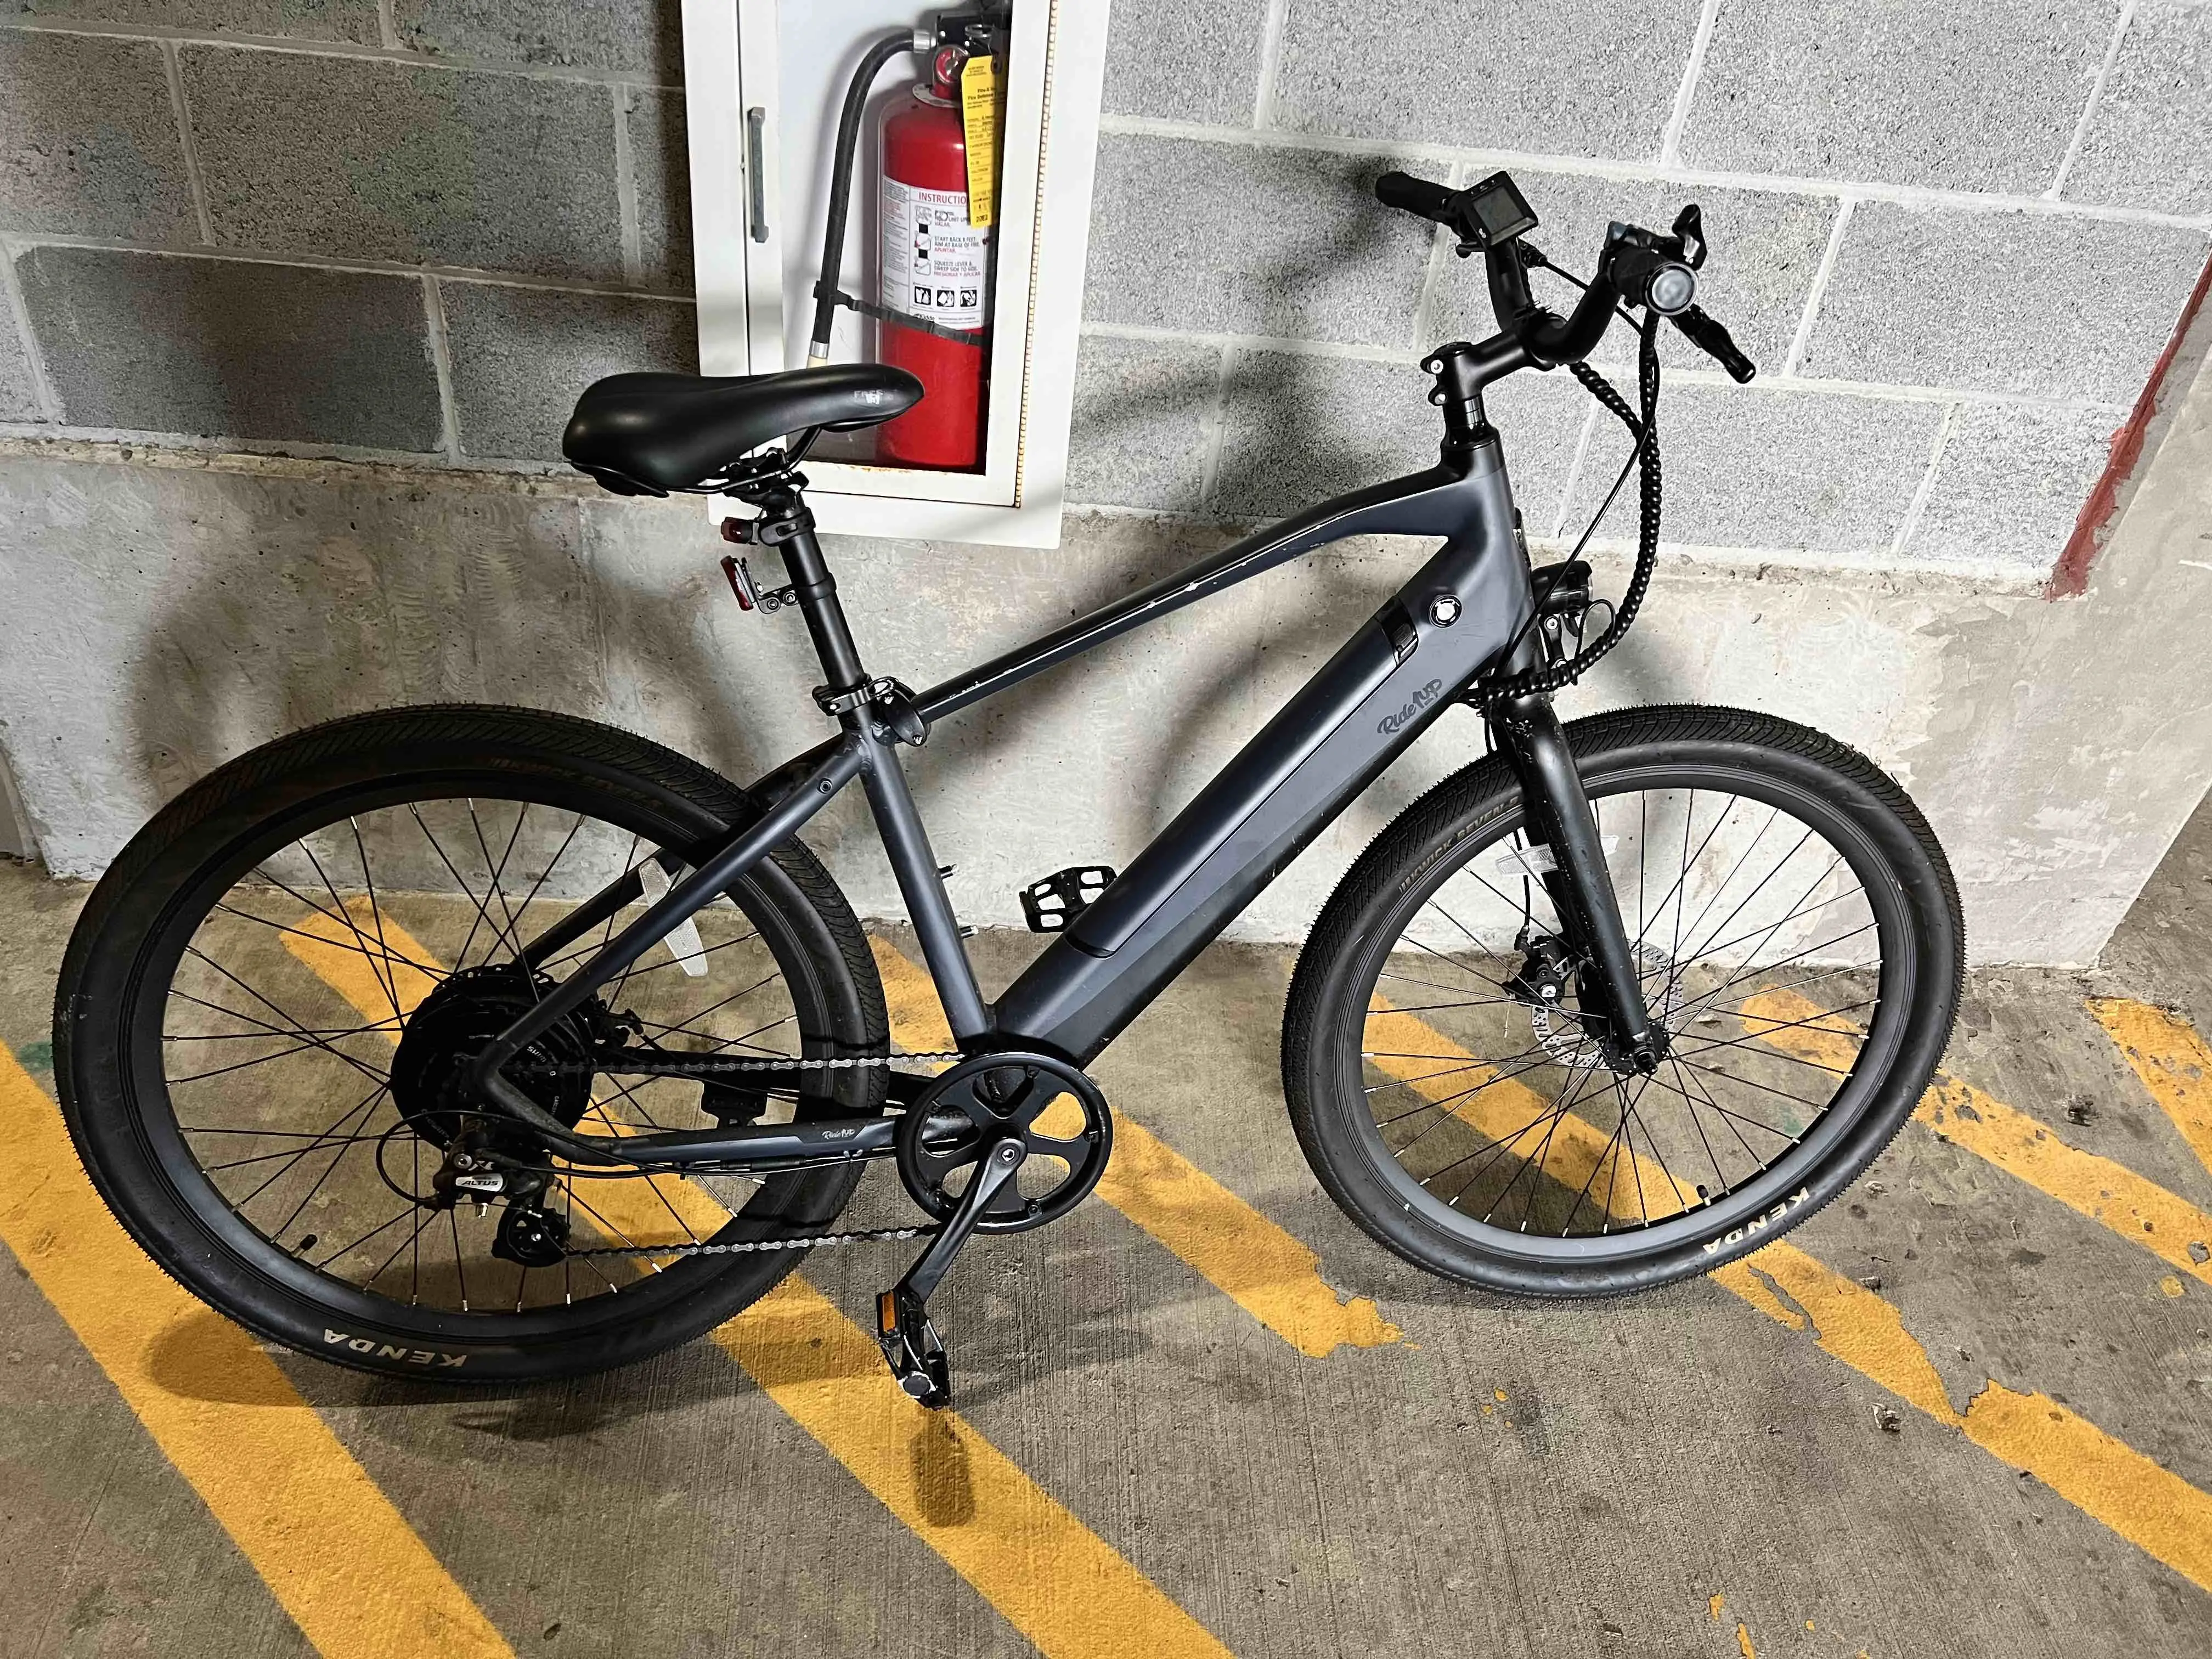 An ebike has completely changed my daily routine